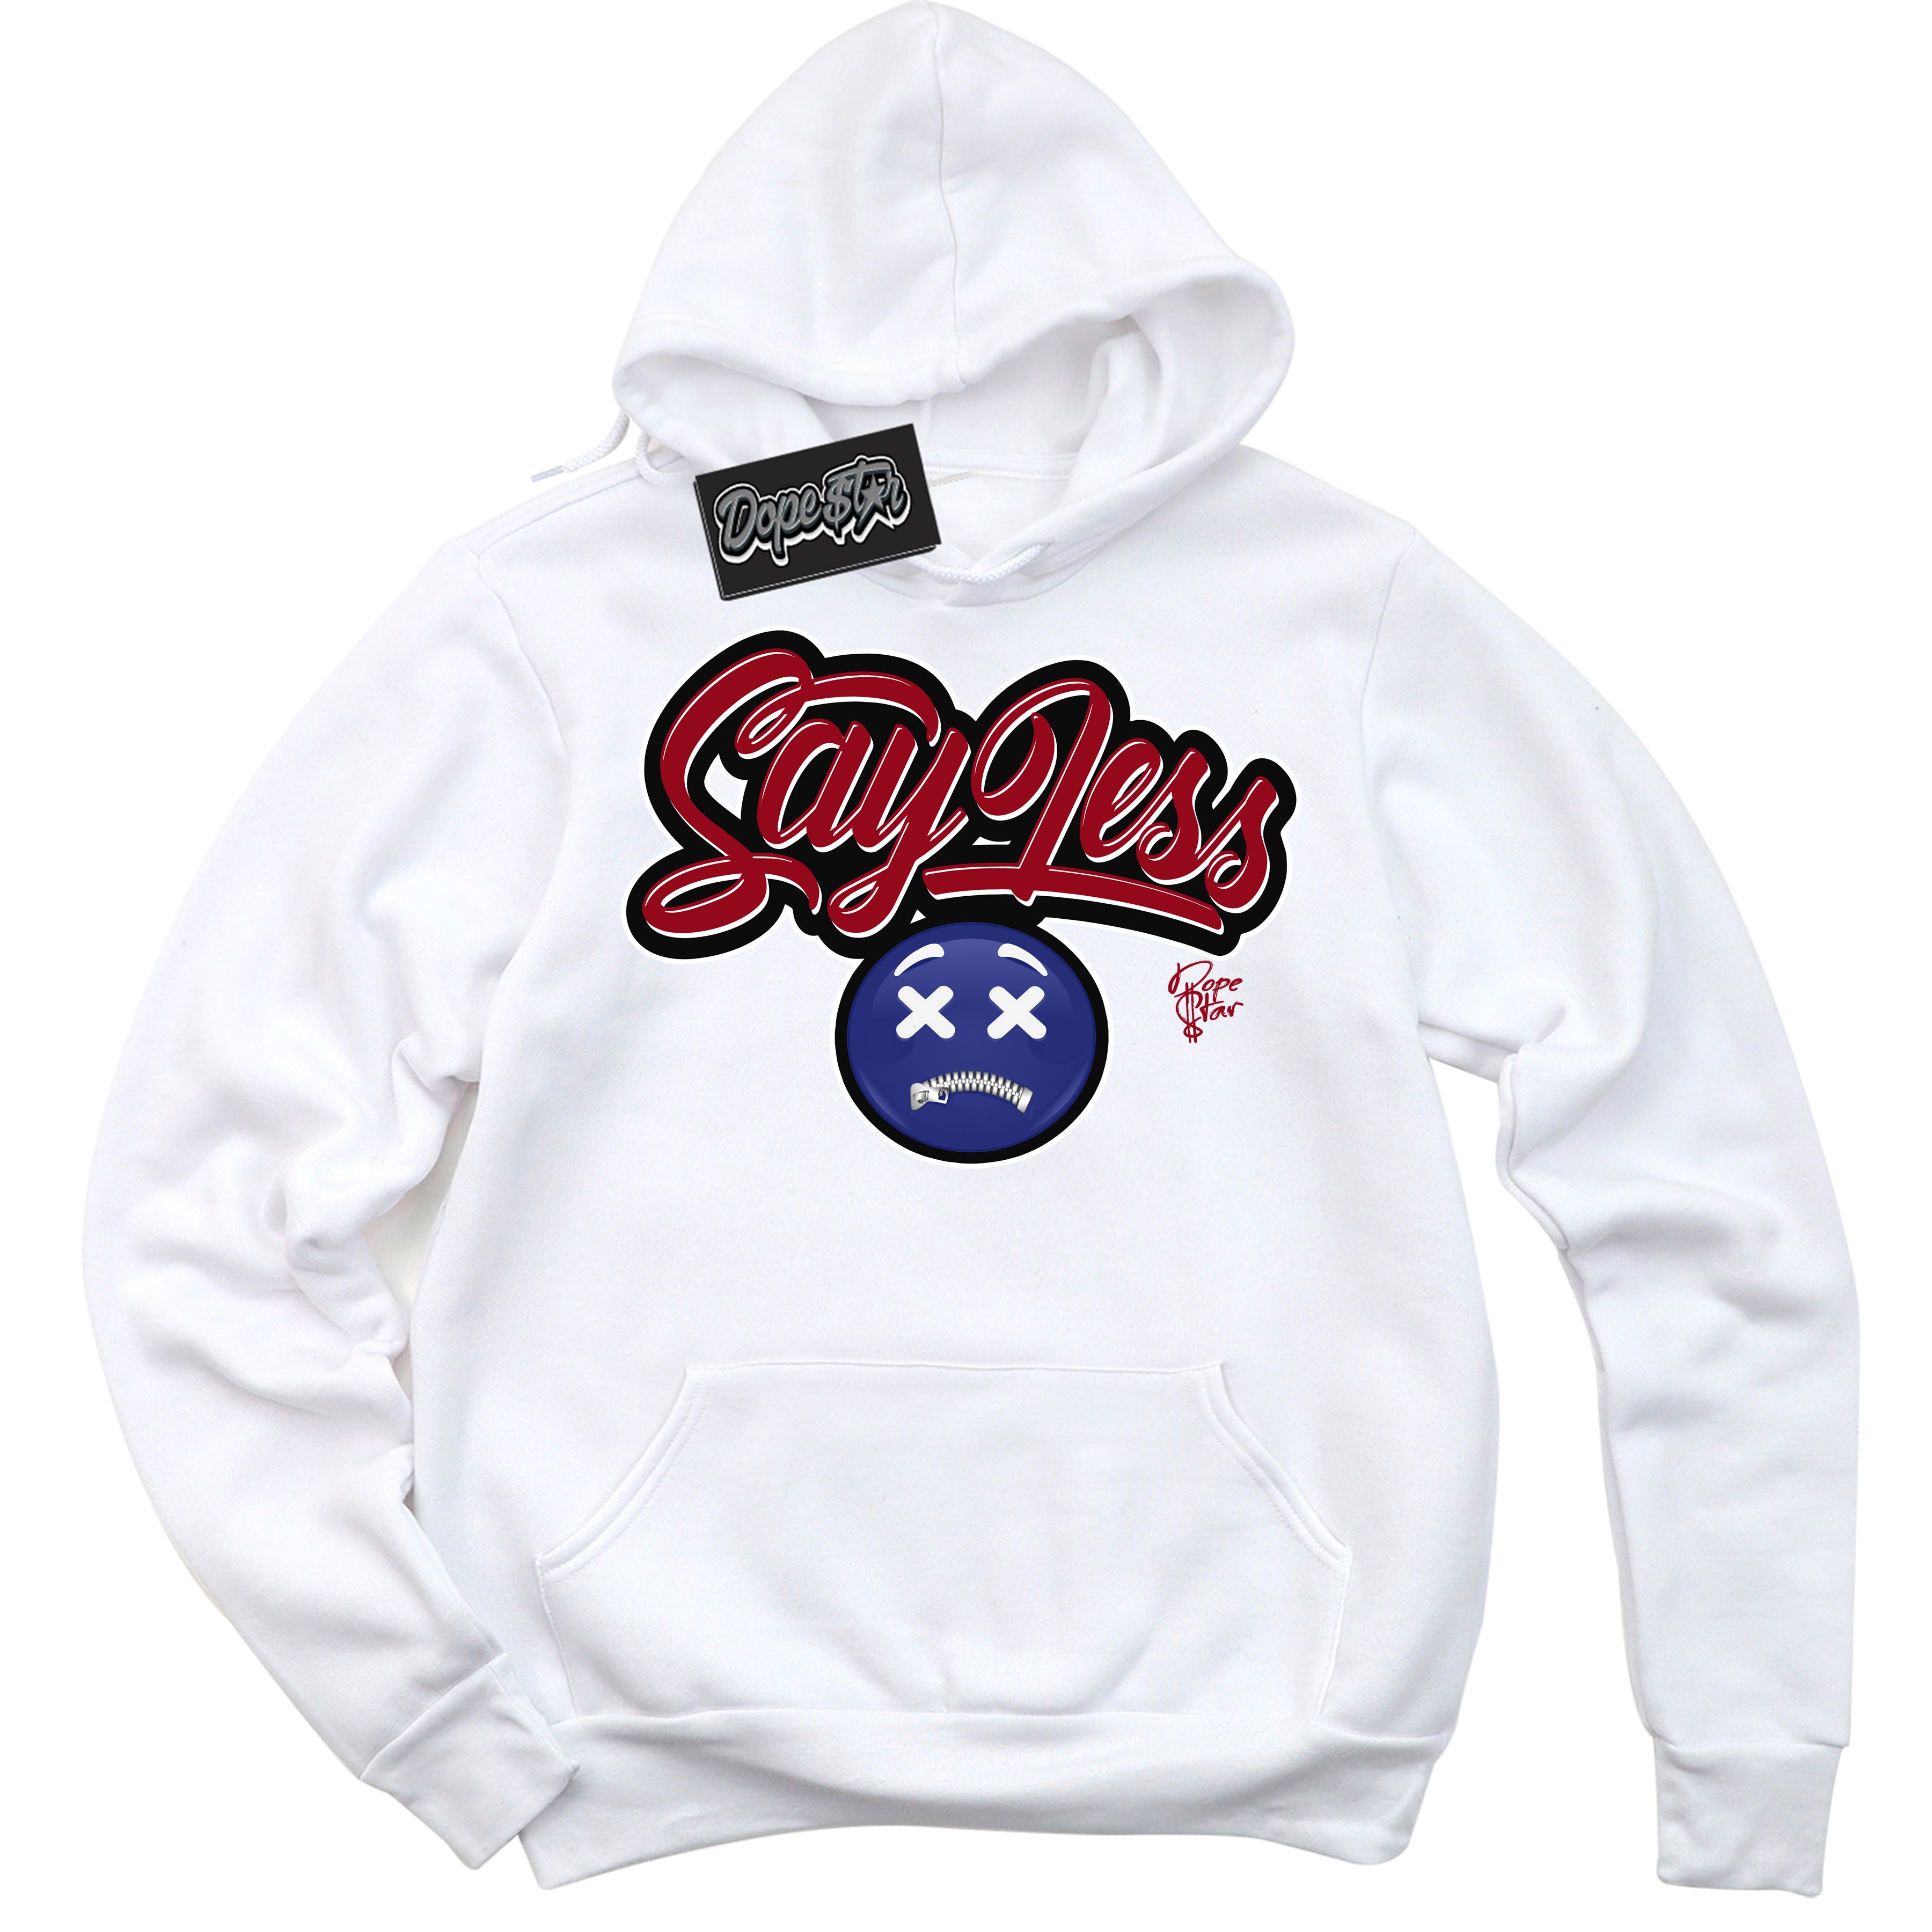 Cool White Hoodie with “ Say Less ”  design that Perfectly Matches Playoffs 8s Sneakers.